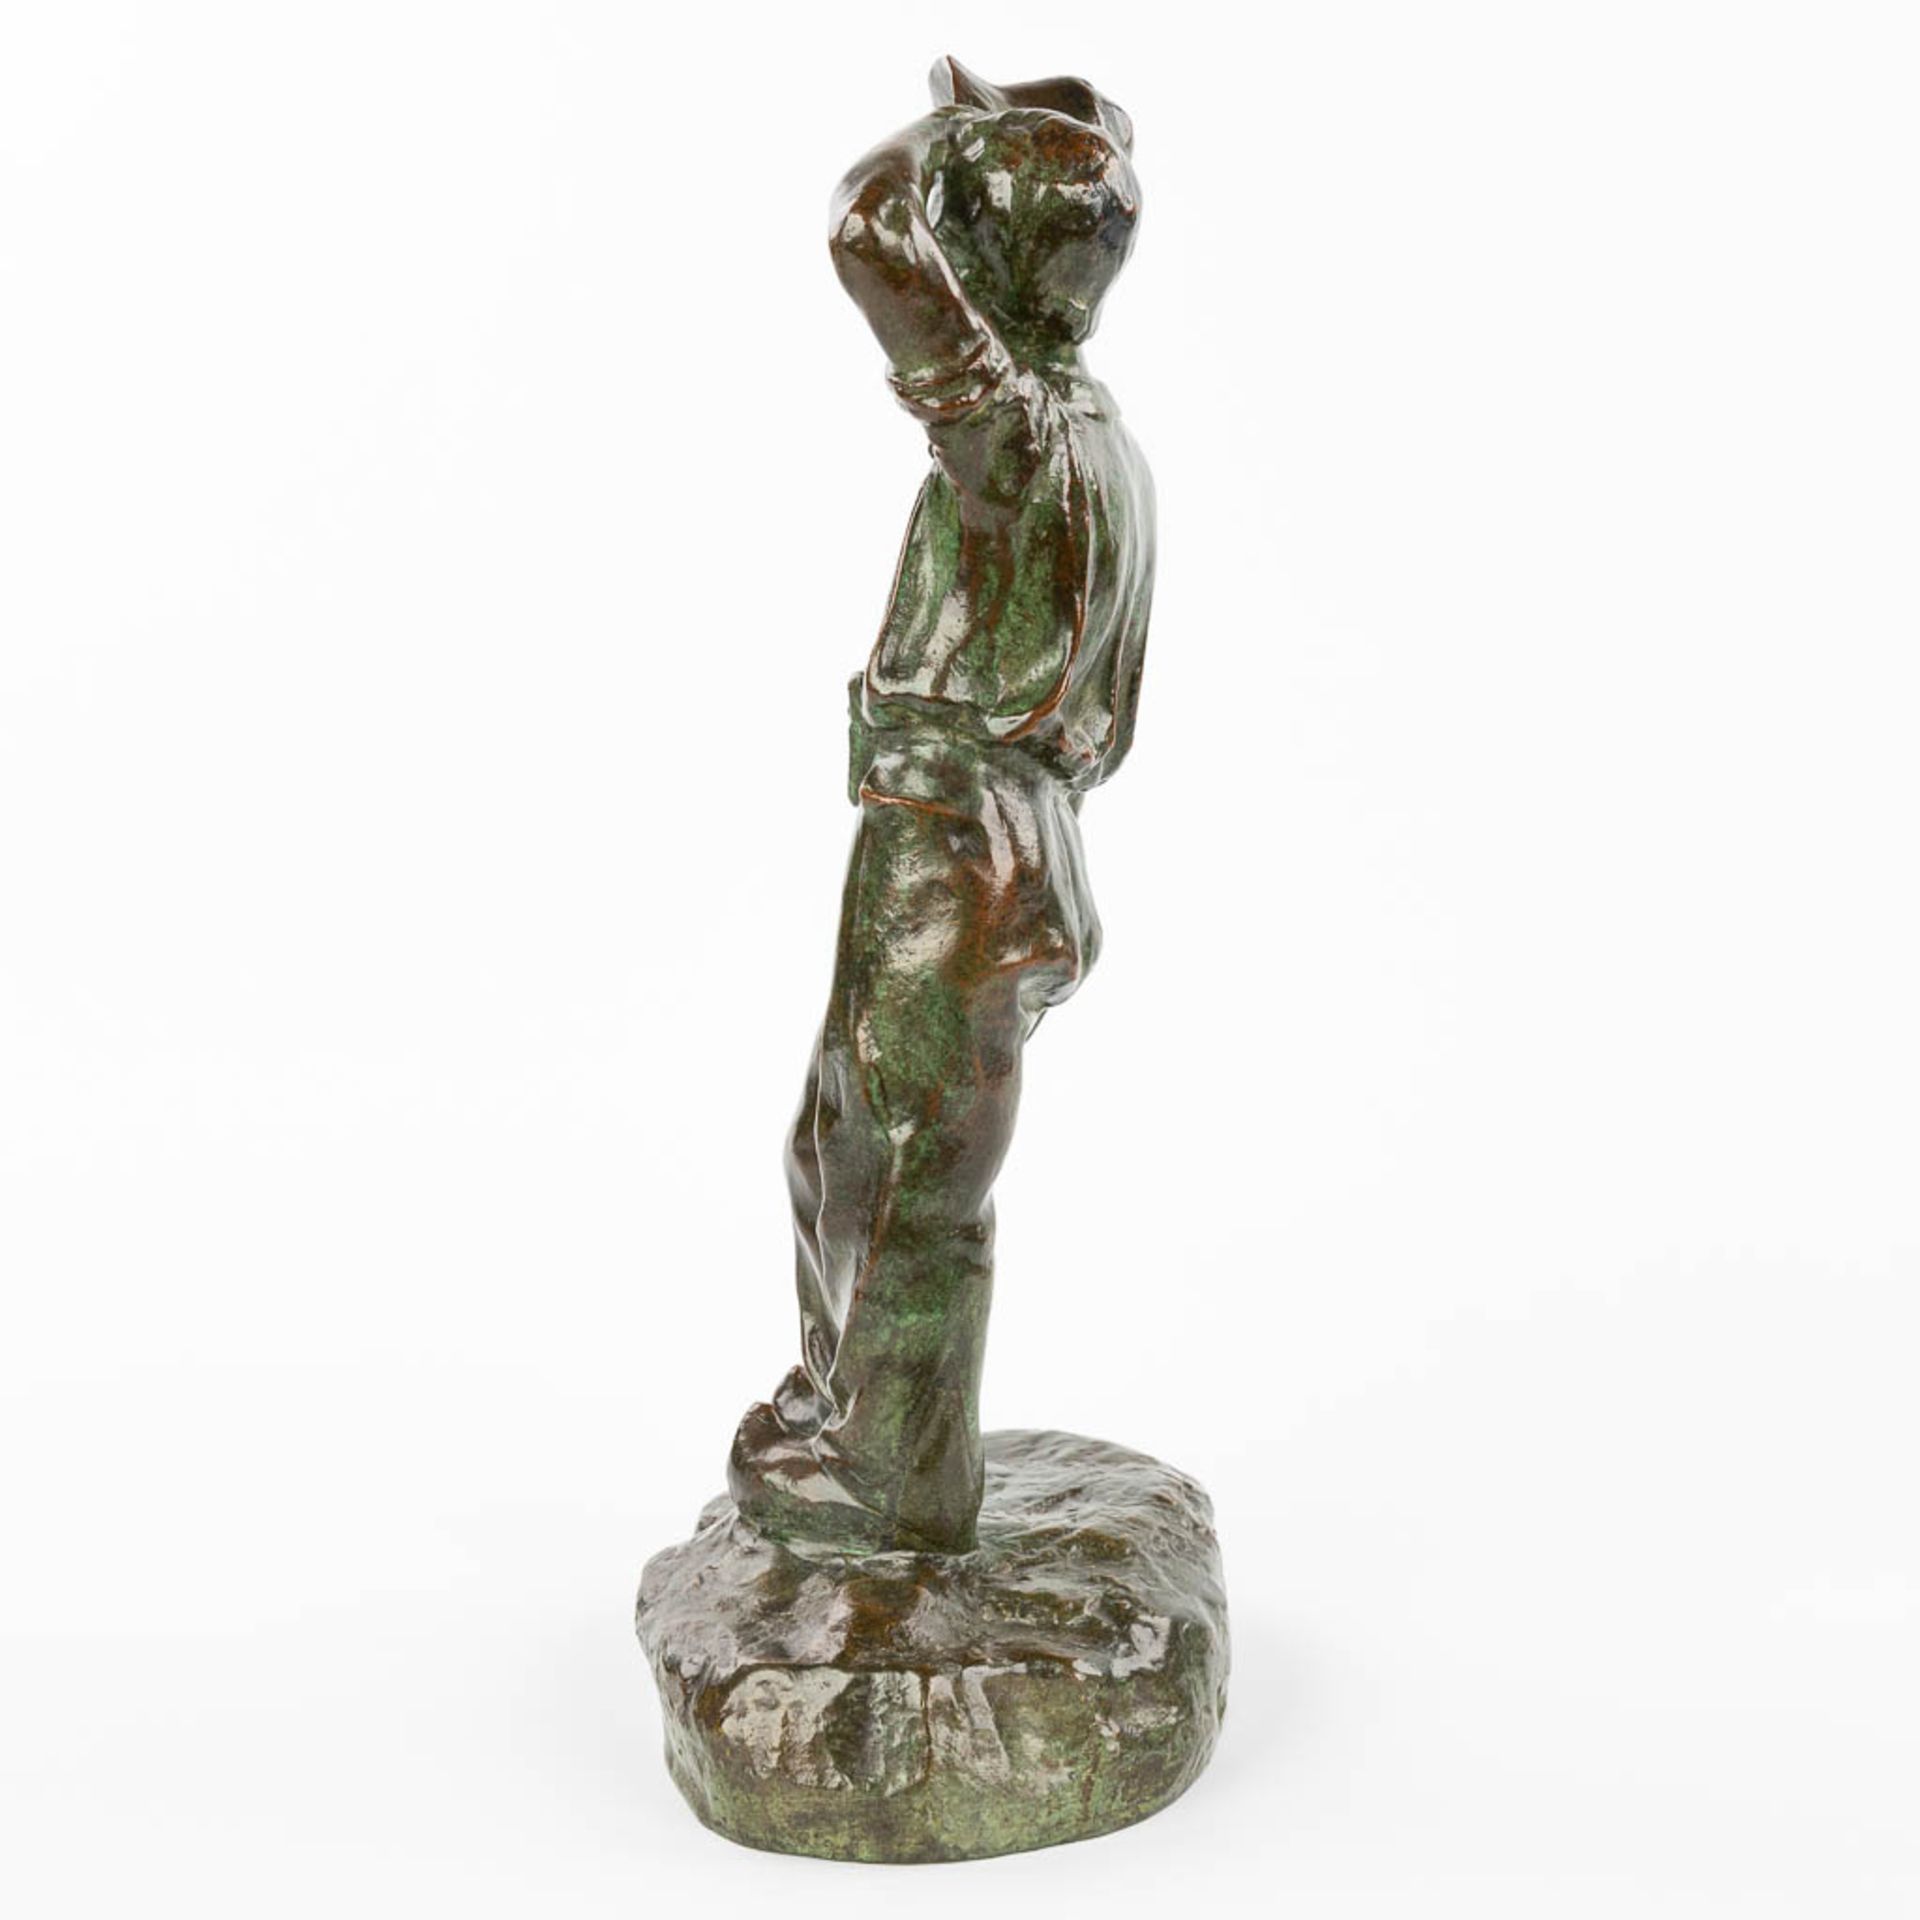 Arthur PUYT (1873-1955) 'Man with the hat', patinated bronze. (H:40cm) - Image 2 of 10